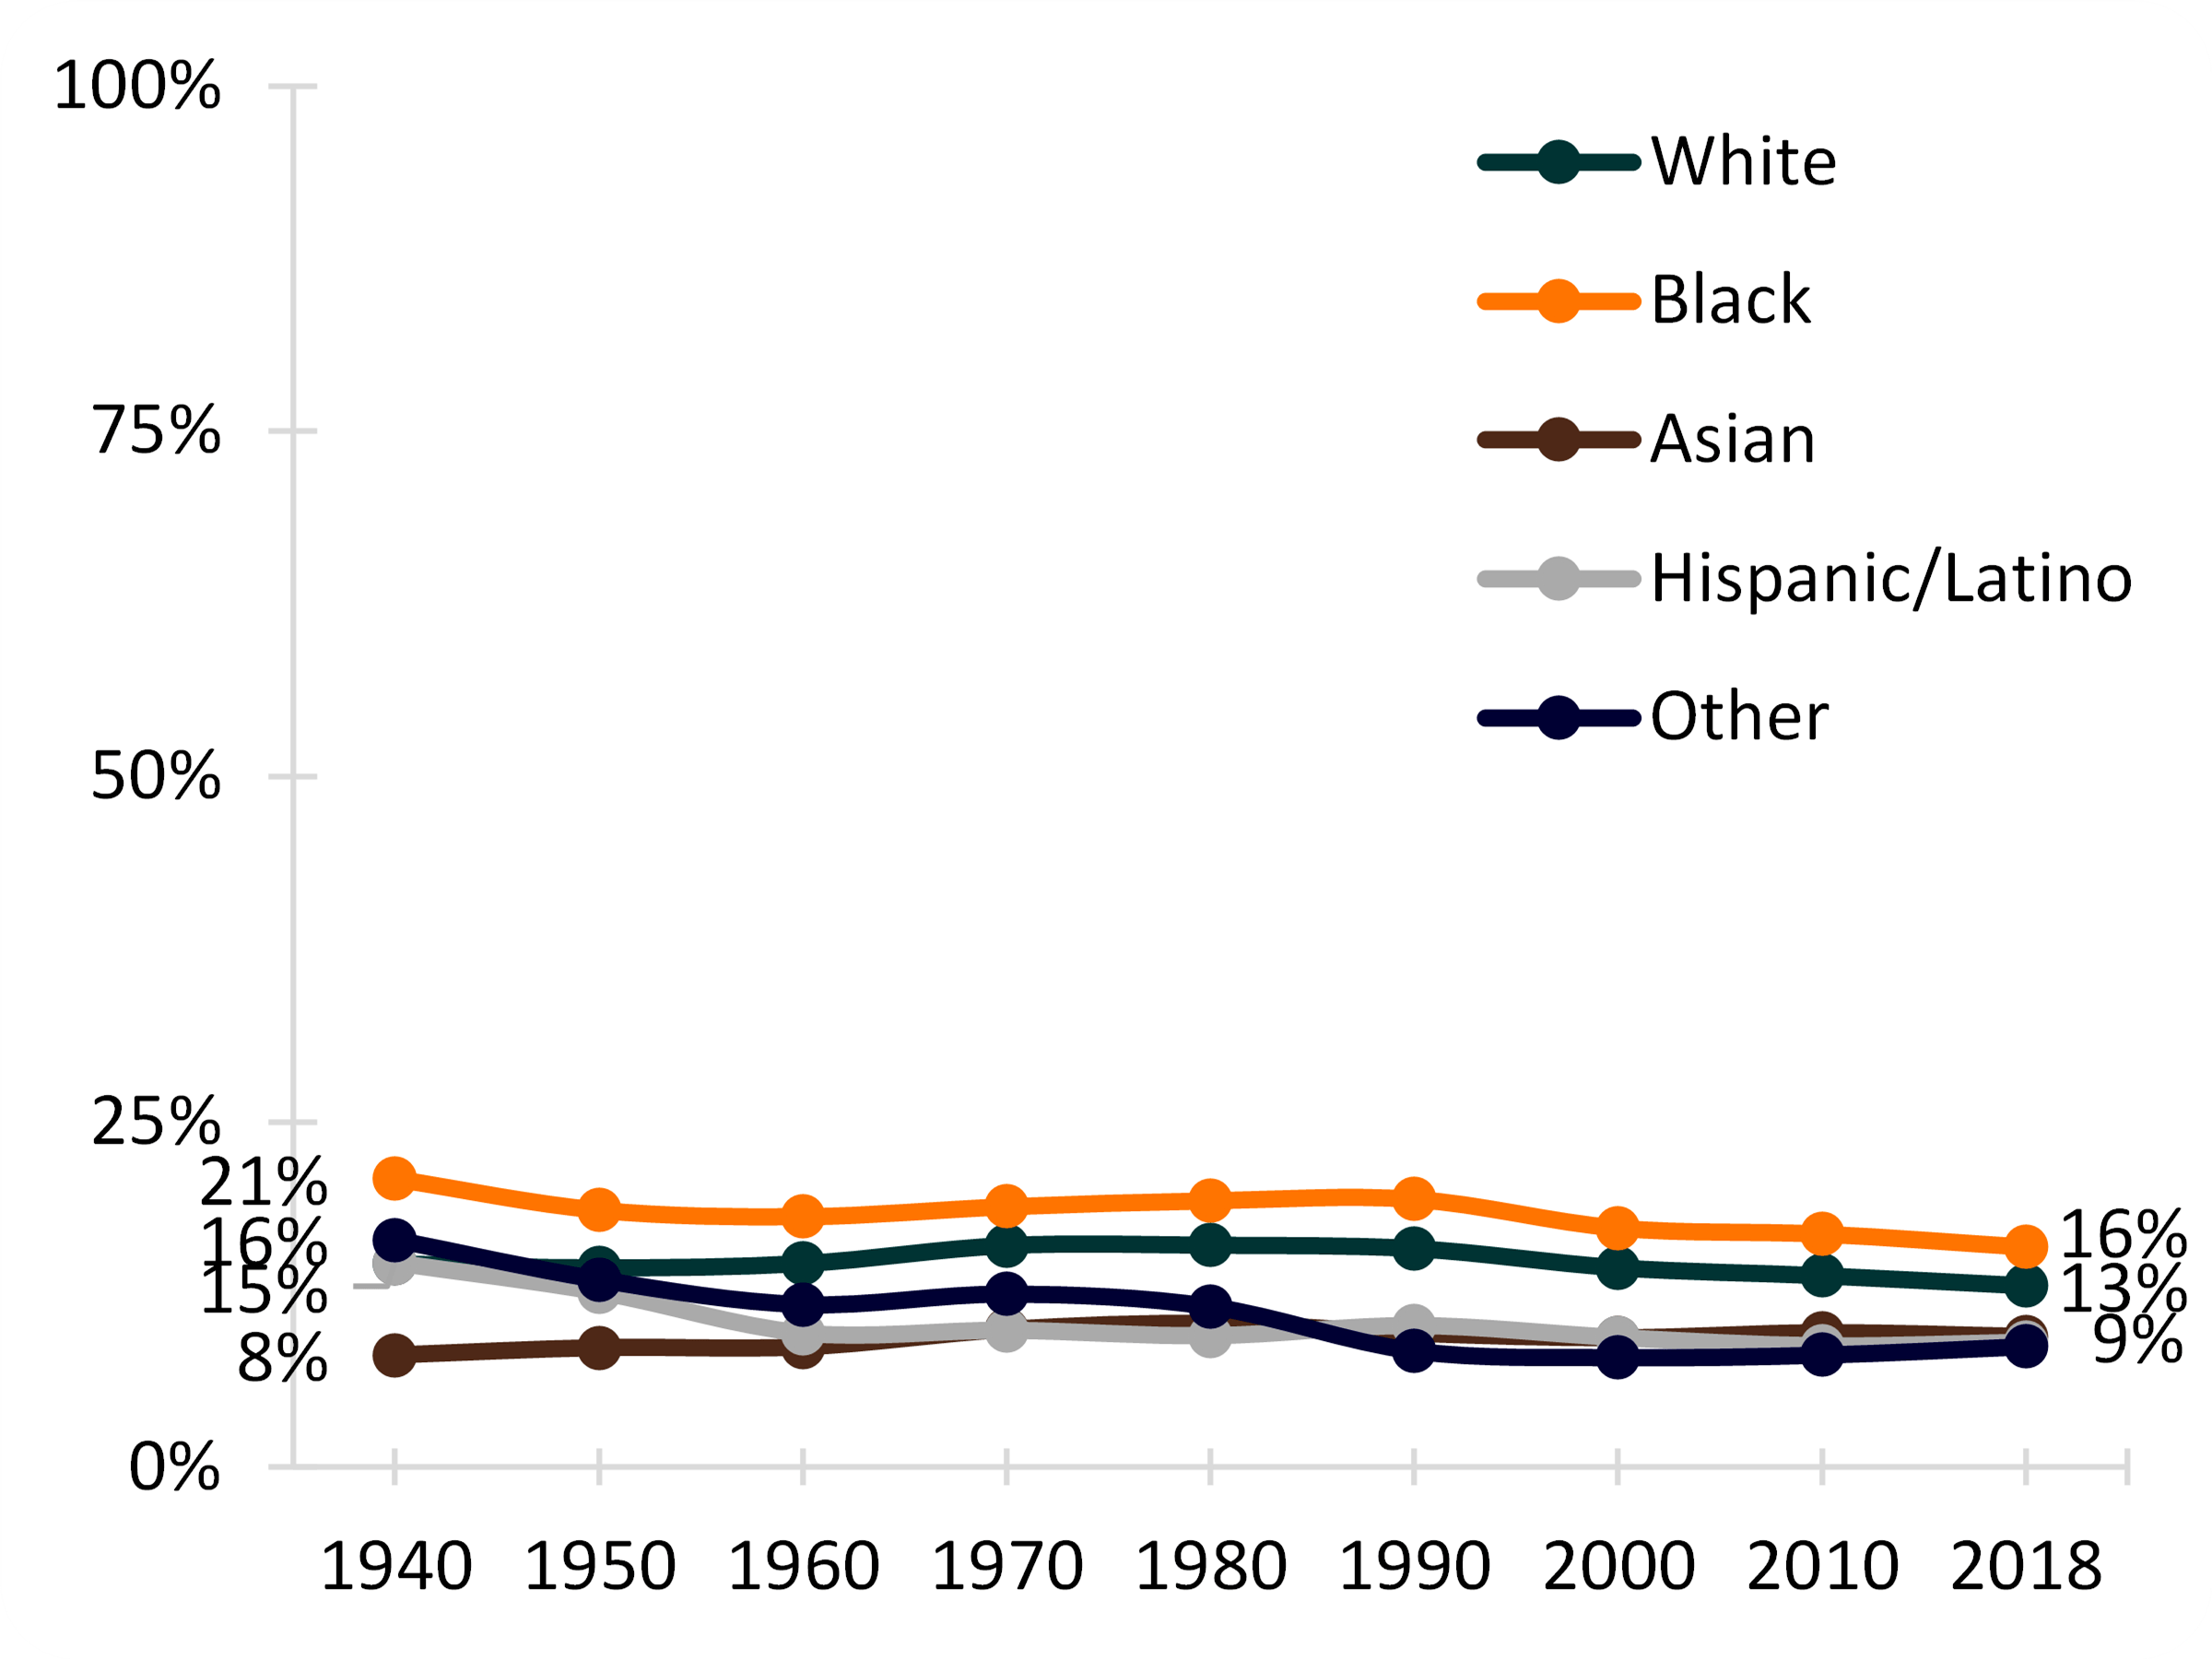 4-color line chart showing Figure 2. Percentage of Women Currently Widowed Among Ever-Married Women by Race/Ethnicity, 1940-2018